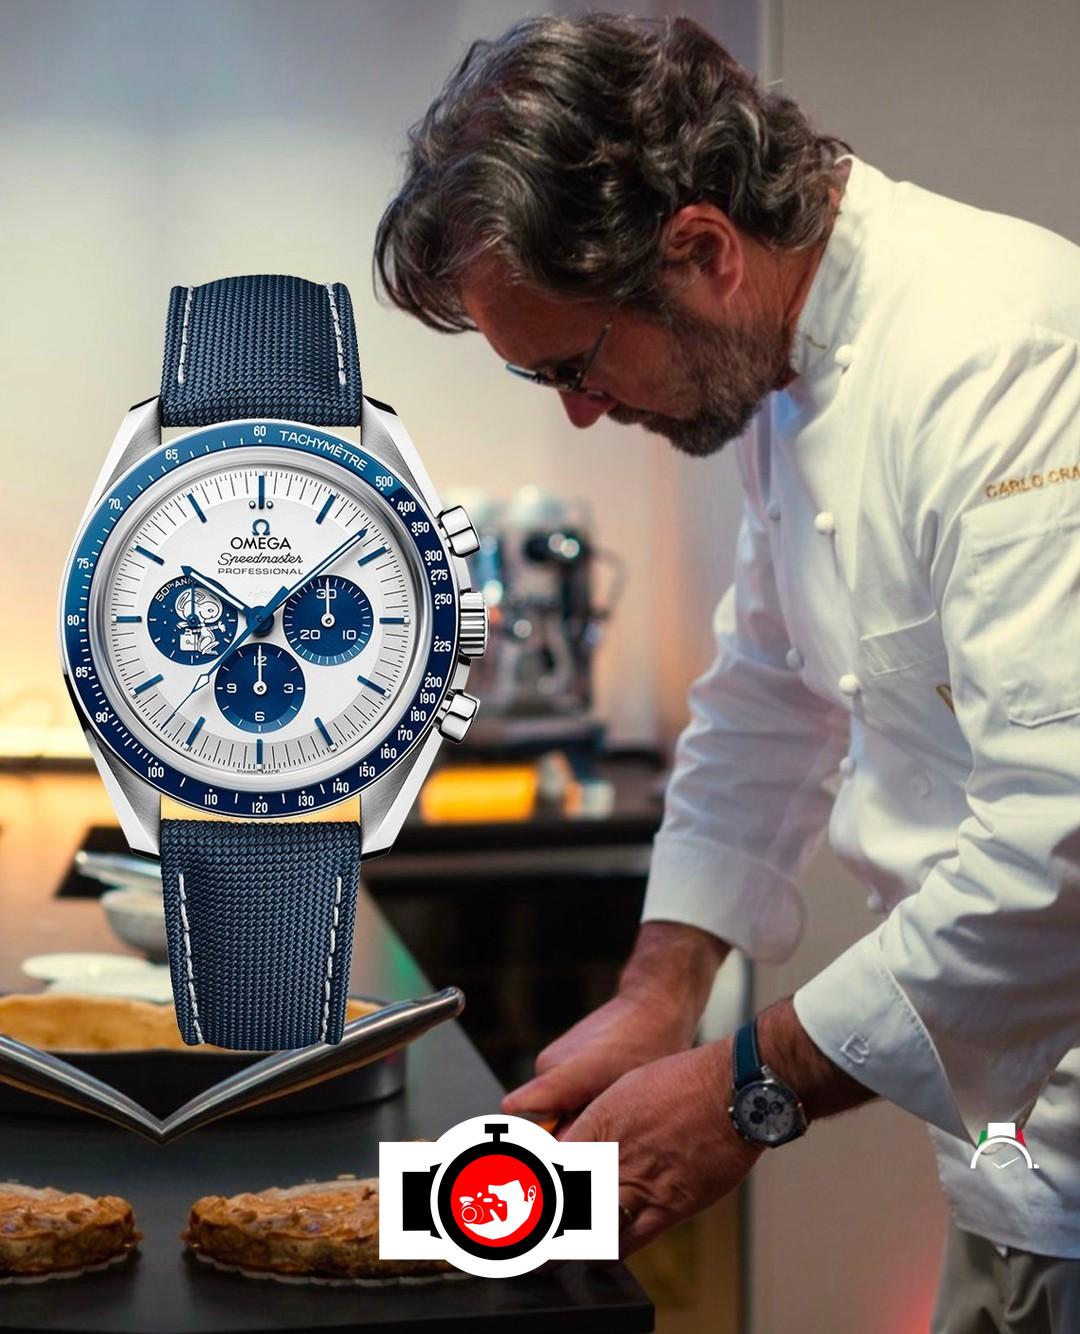 Carlo Cracco's Impressive Watch Collection: The Stainless Steel Omega Speedmaster 